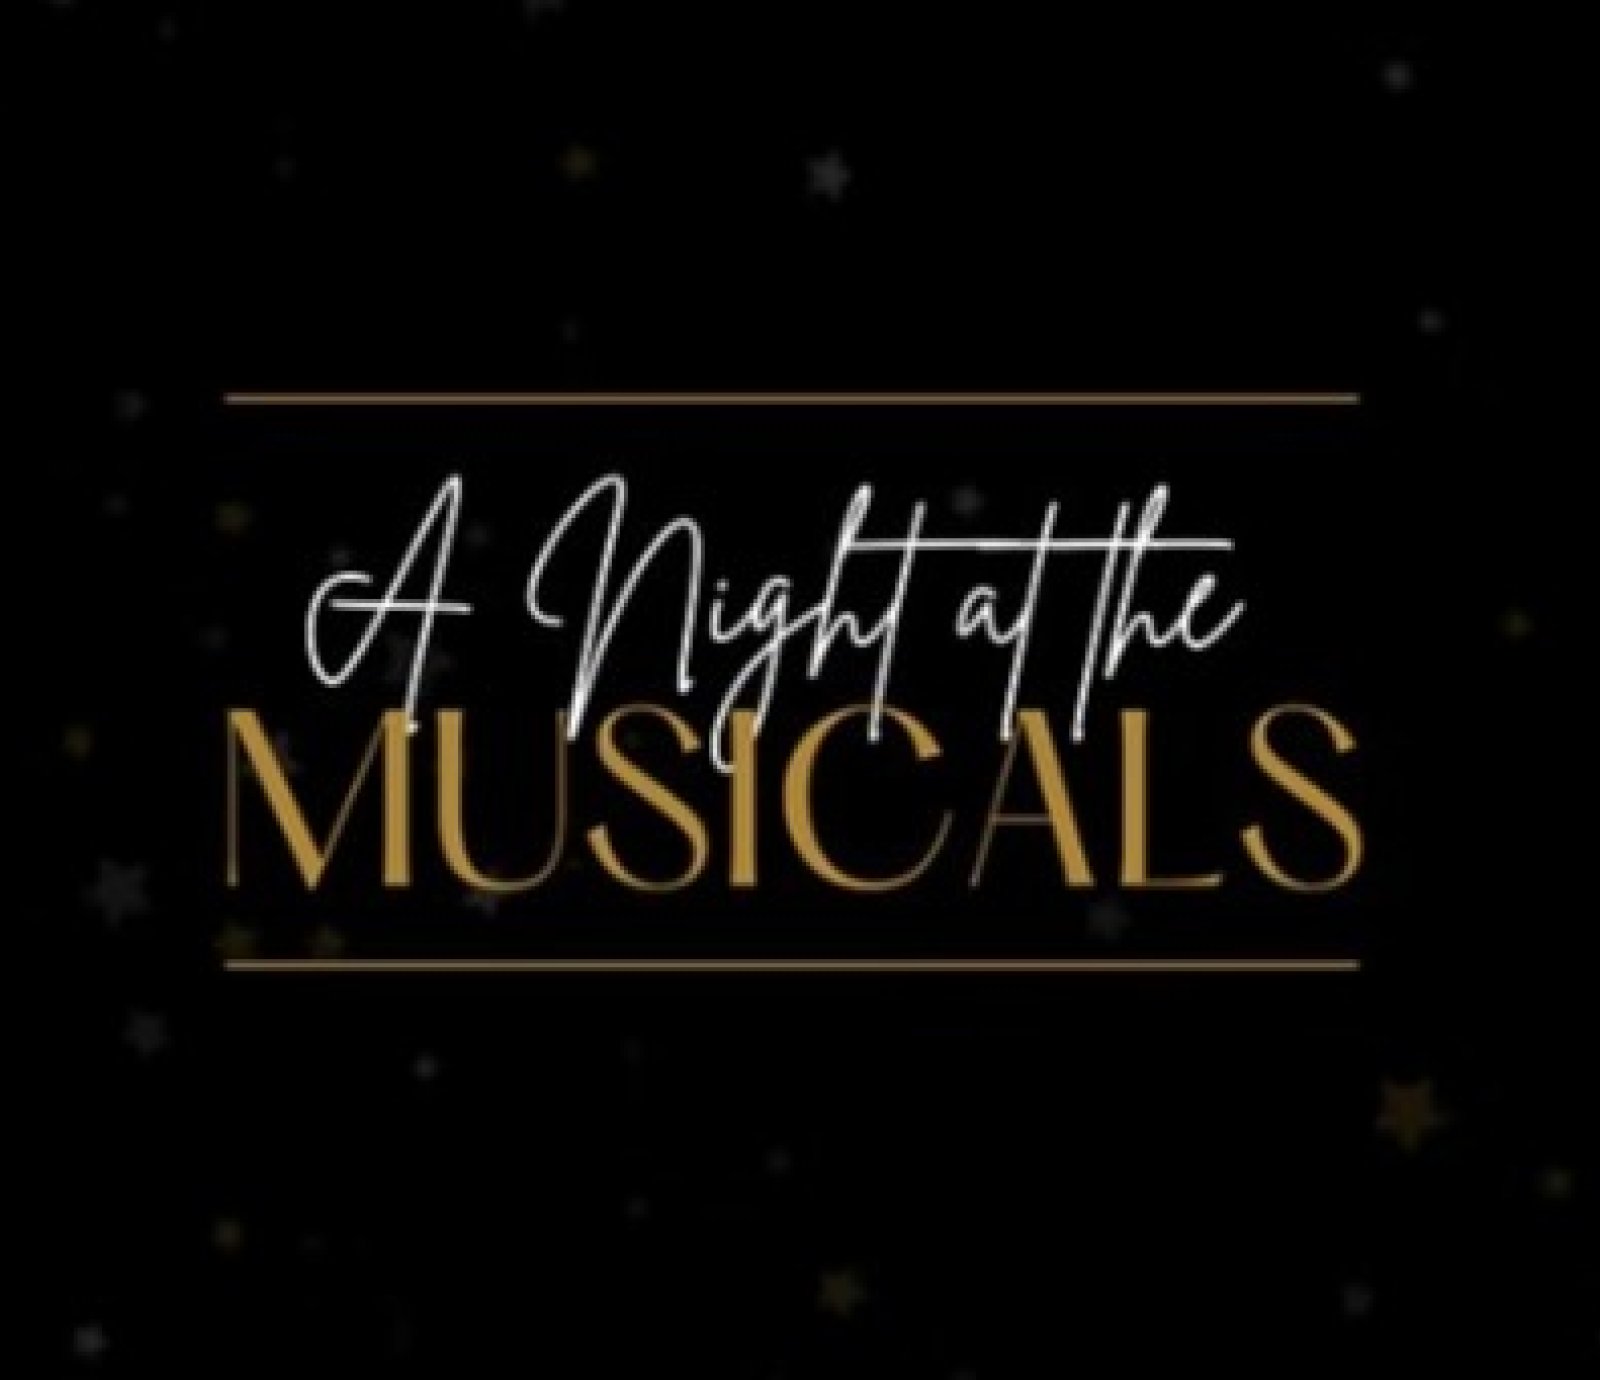 A Night at the Musicals